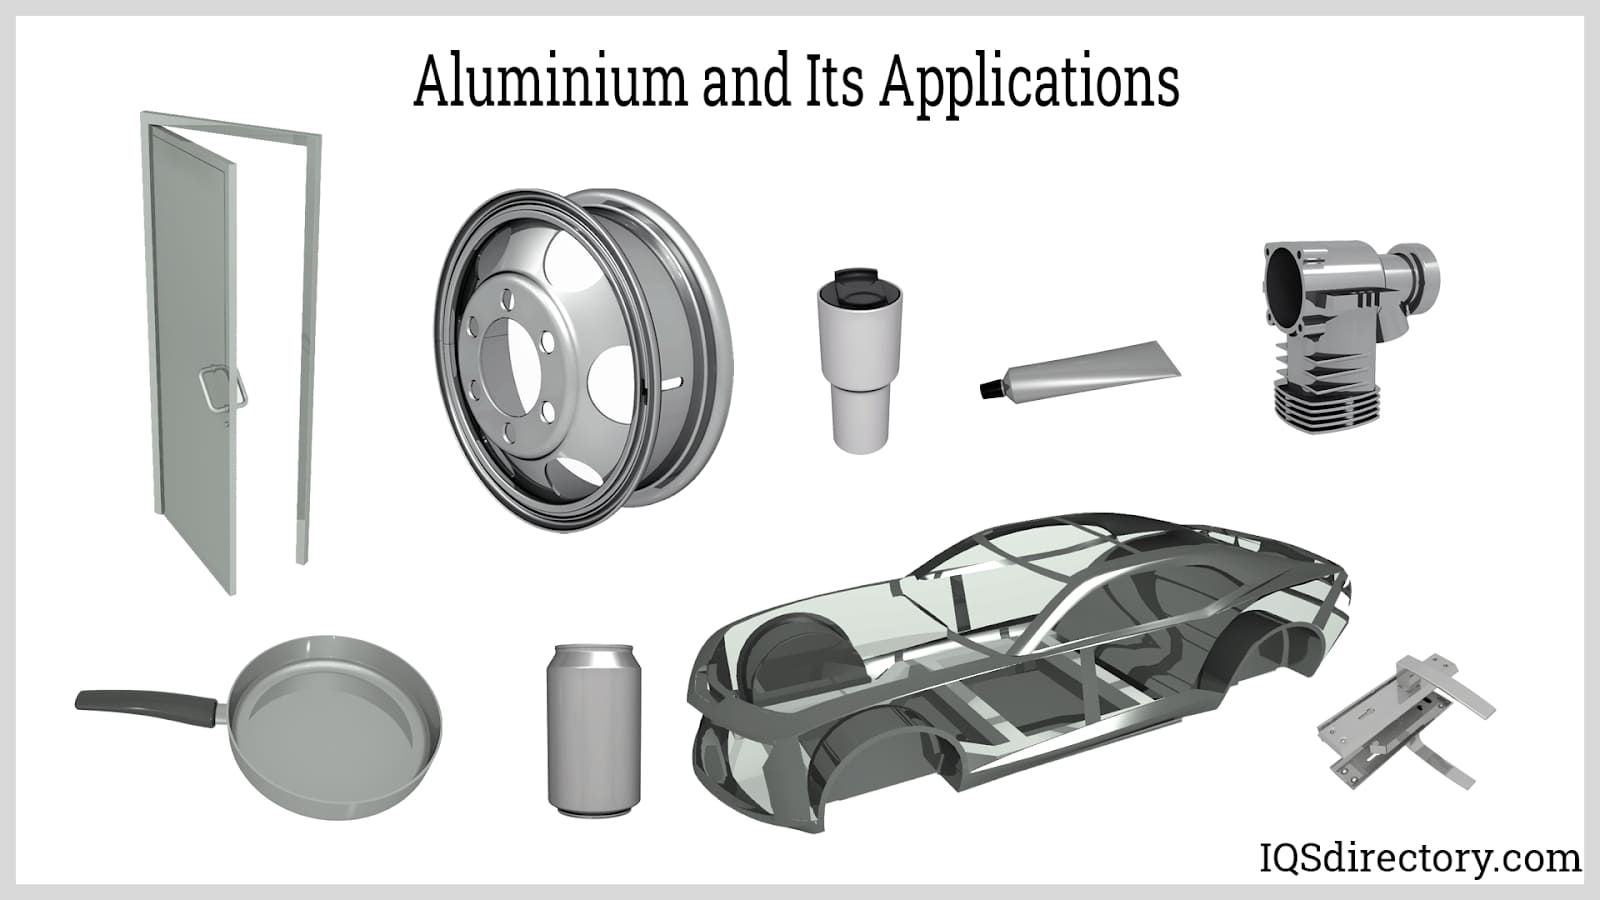 What Are the Most Common Uses for Aluminium?